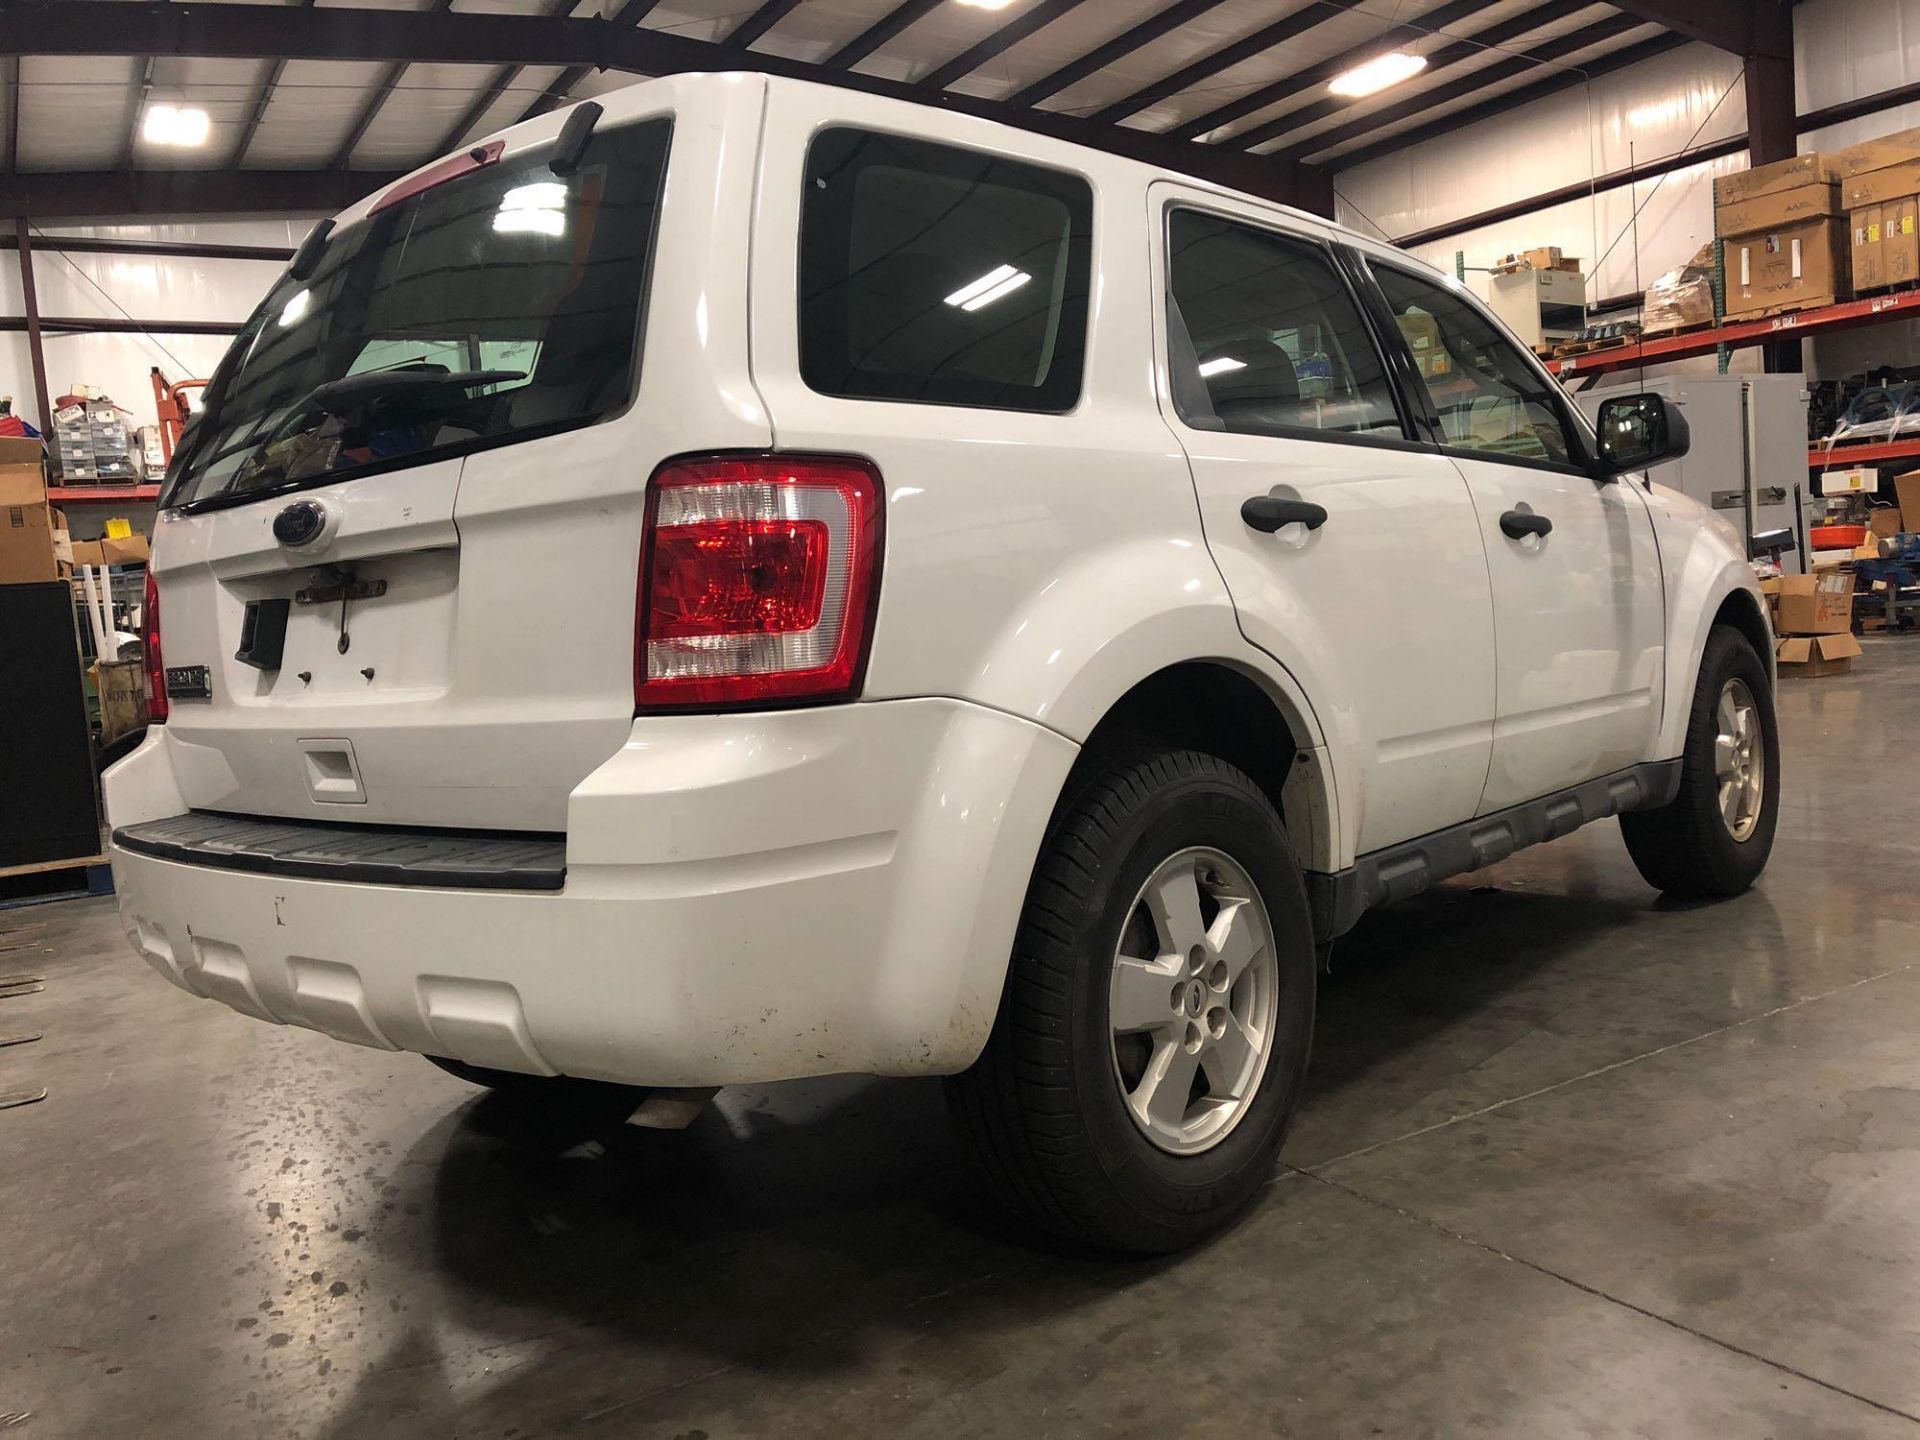 2010 FORD ESCAPE SUV, 4 DOOR, AUTOMATIC TRANSMISSION, RUNS - Image 4 of 17